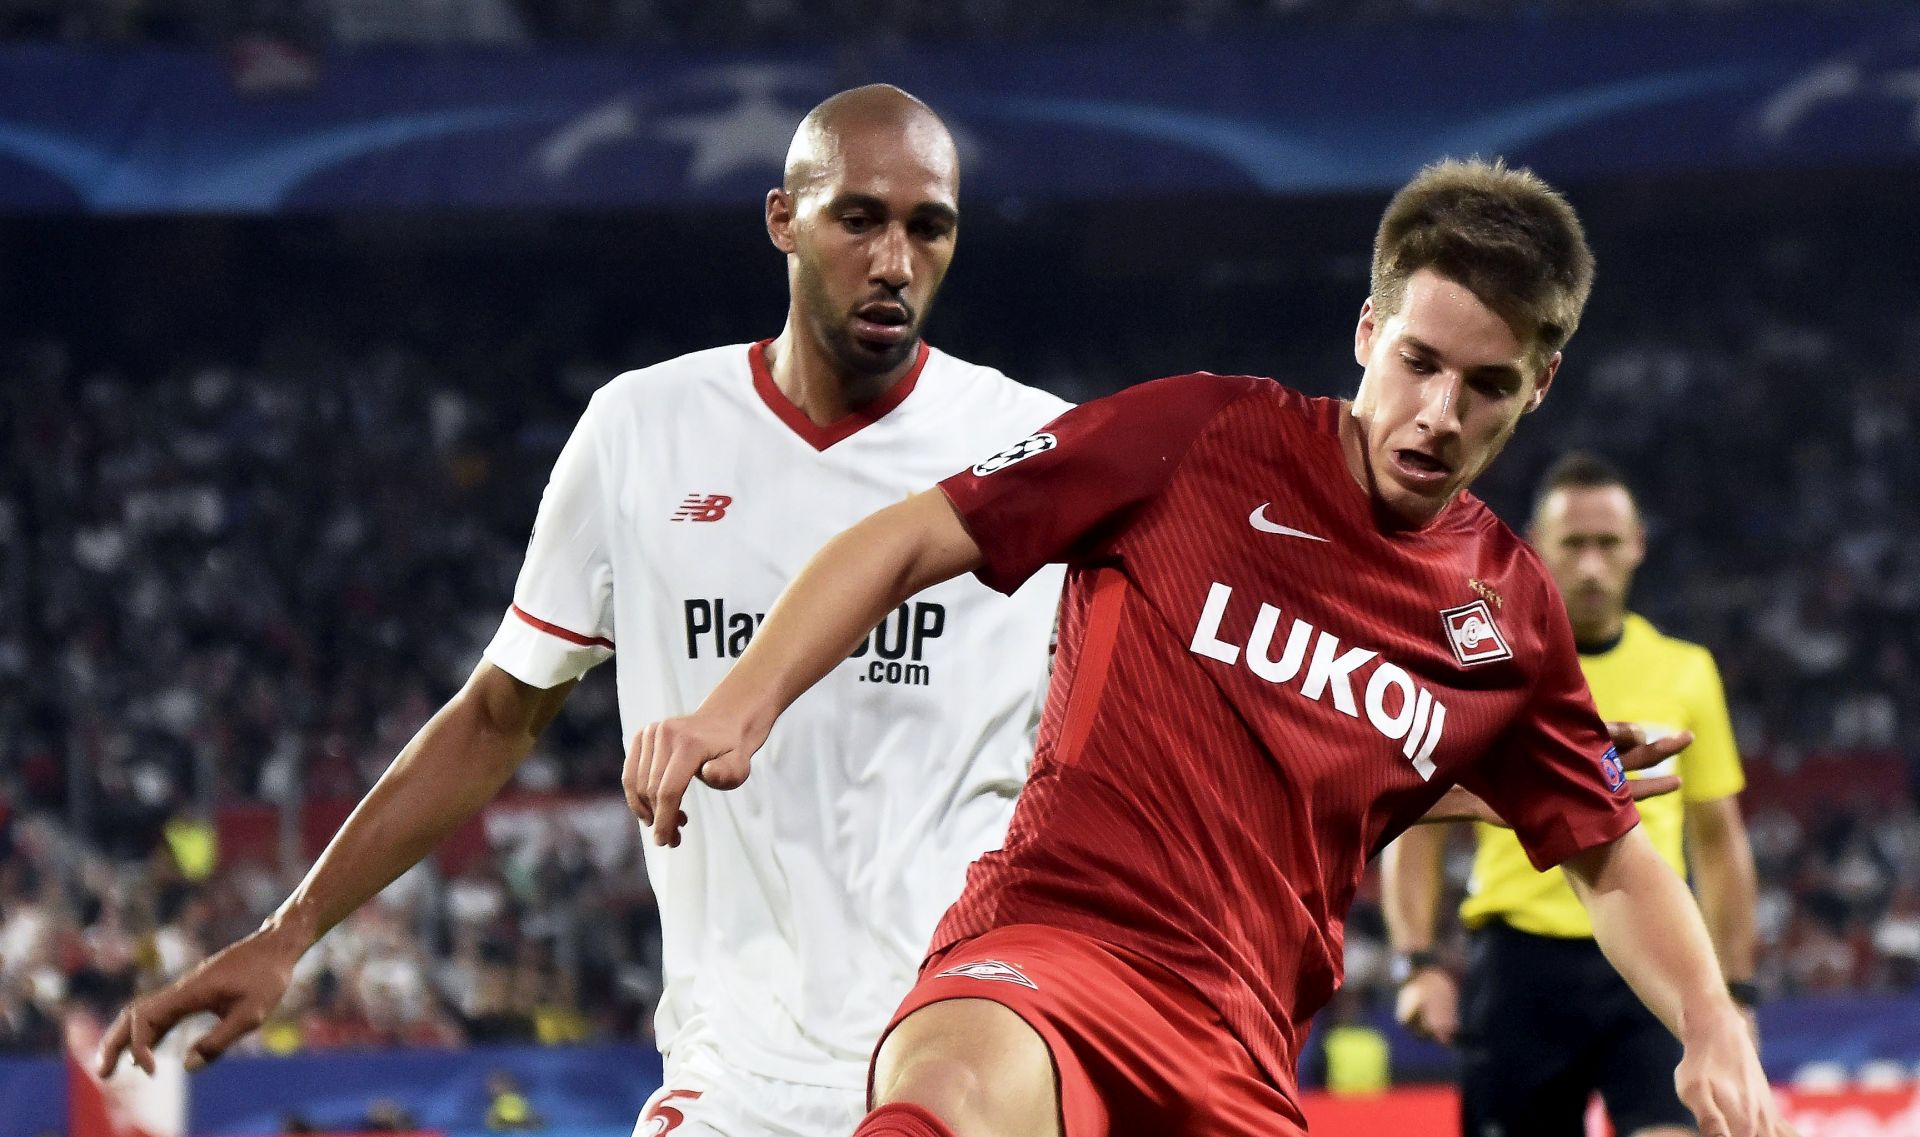 epa06302864 Spartak Moscow's midfielder Mario Pasalic (R) in action against Sevilla's French midfielder Steven N'Zonzi (L) during the UEFA Champions League group E soccer match between Sevilla FC and Spartak Moscow at the Sanchez Pizjuan stadium in Seville, Spain, 01 November 2017.  EPA/RAUL CARO